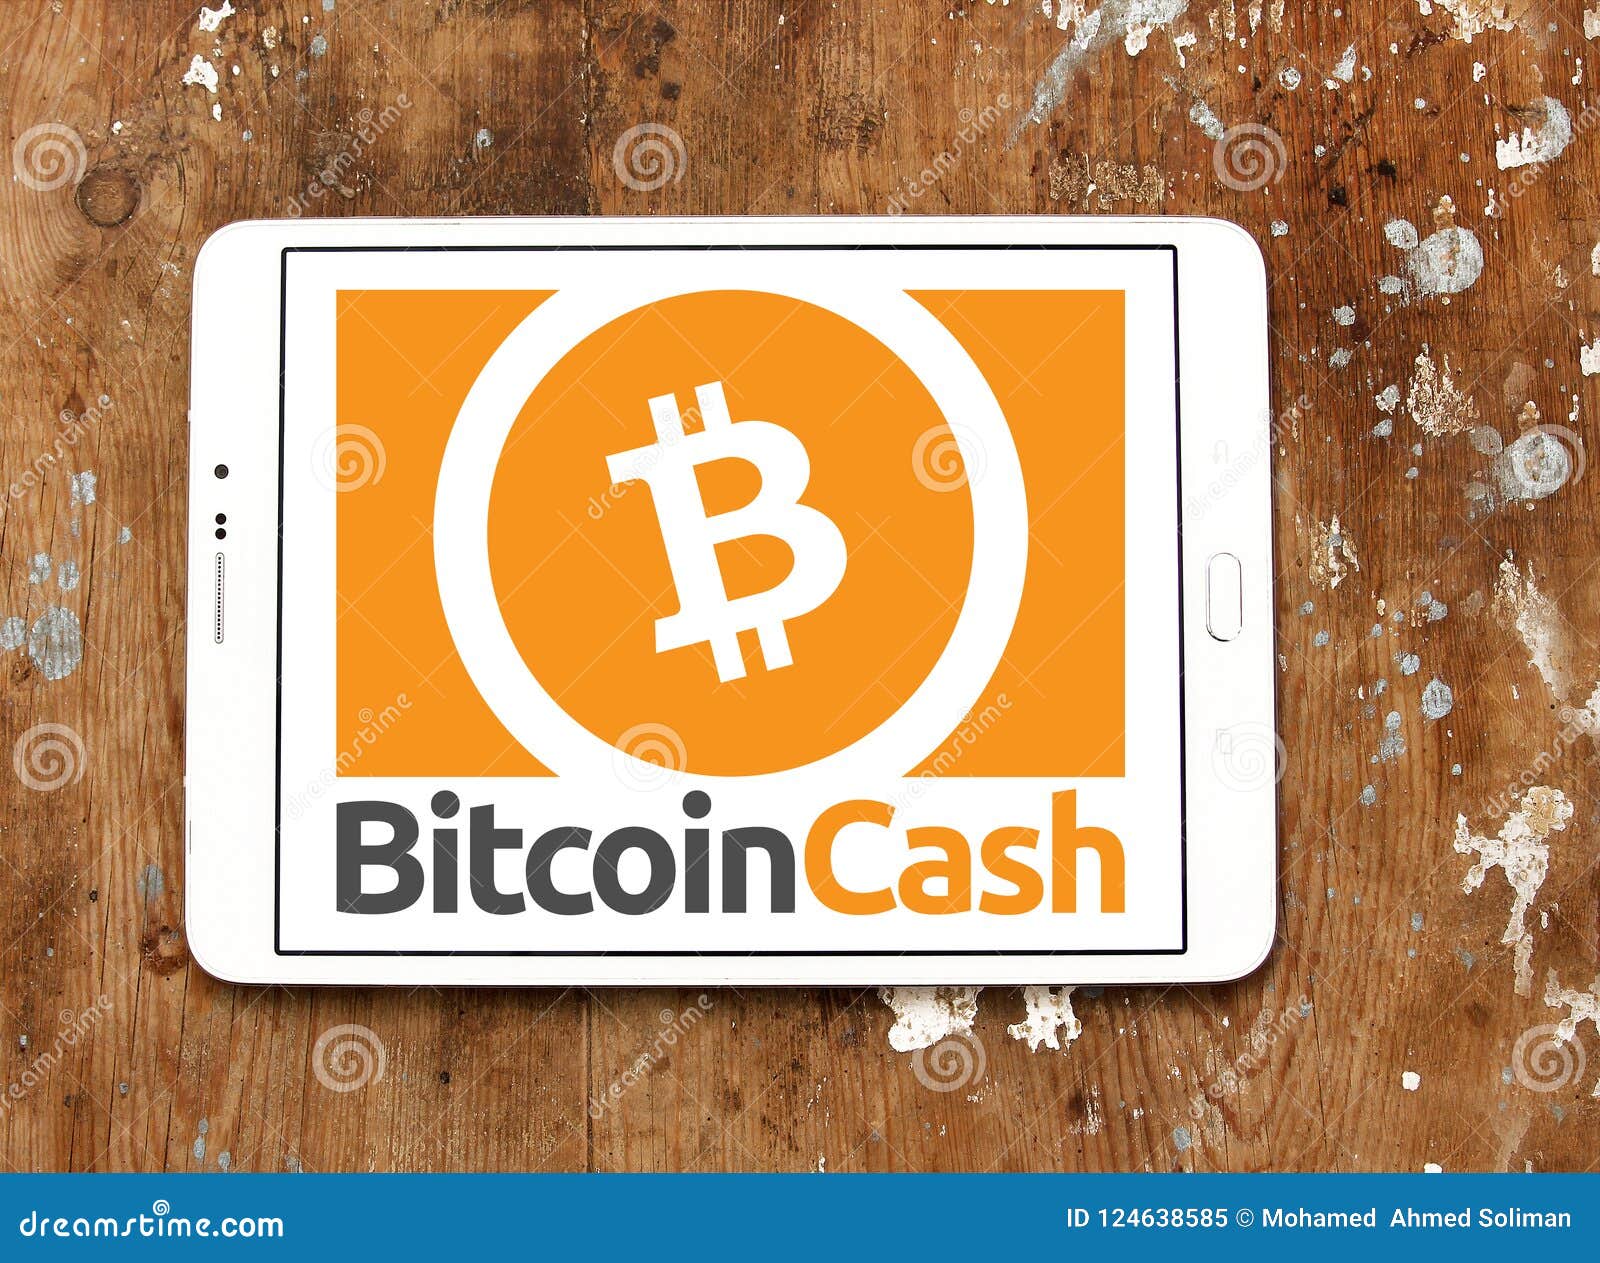 Bitcoin Cash Cryptocurrency Logo Editorial Image - Image ...